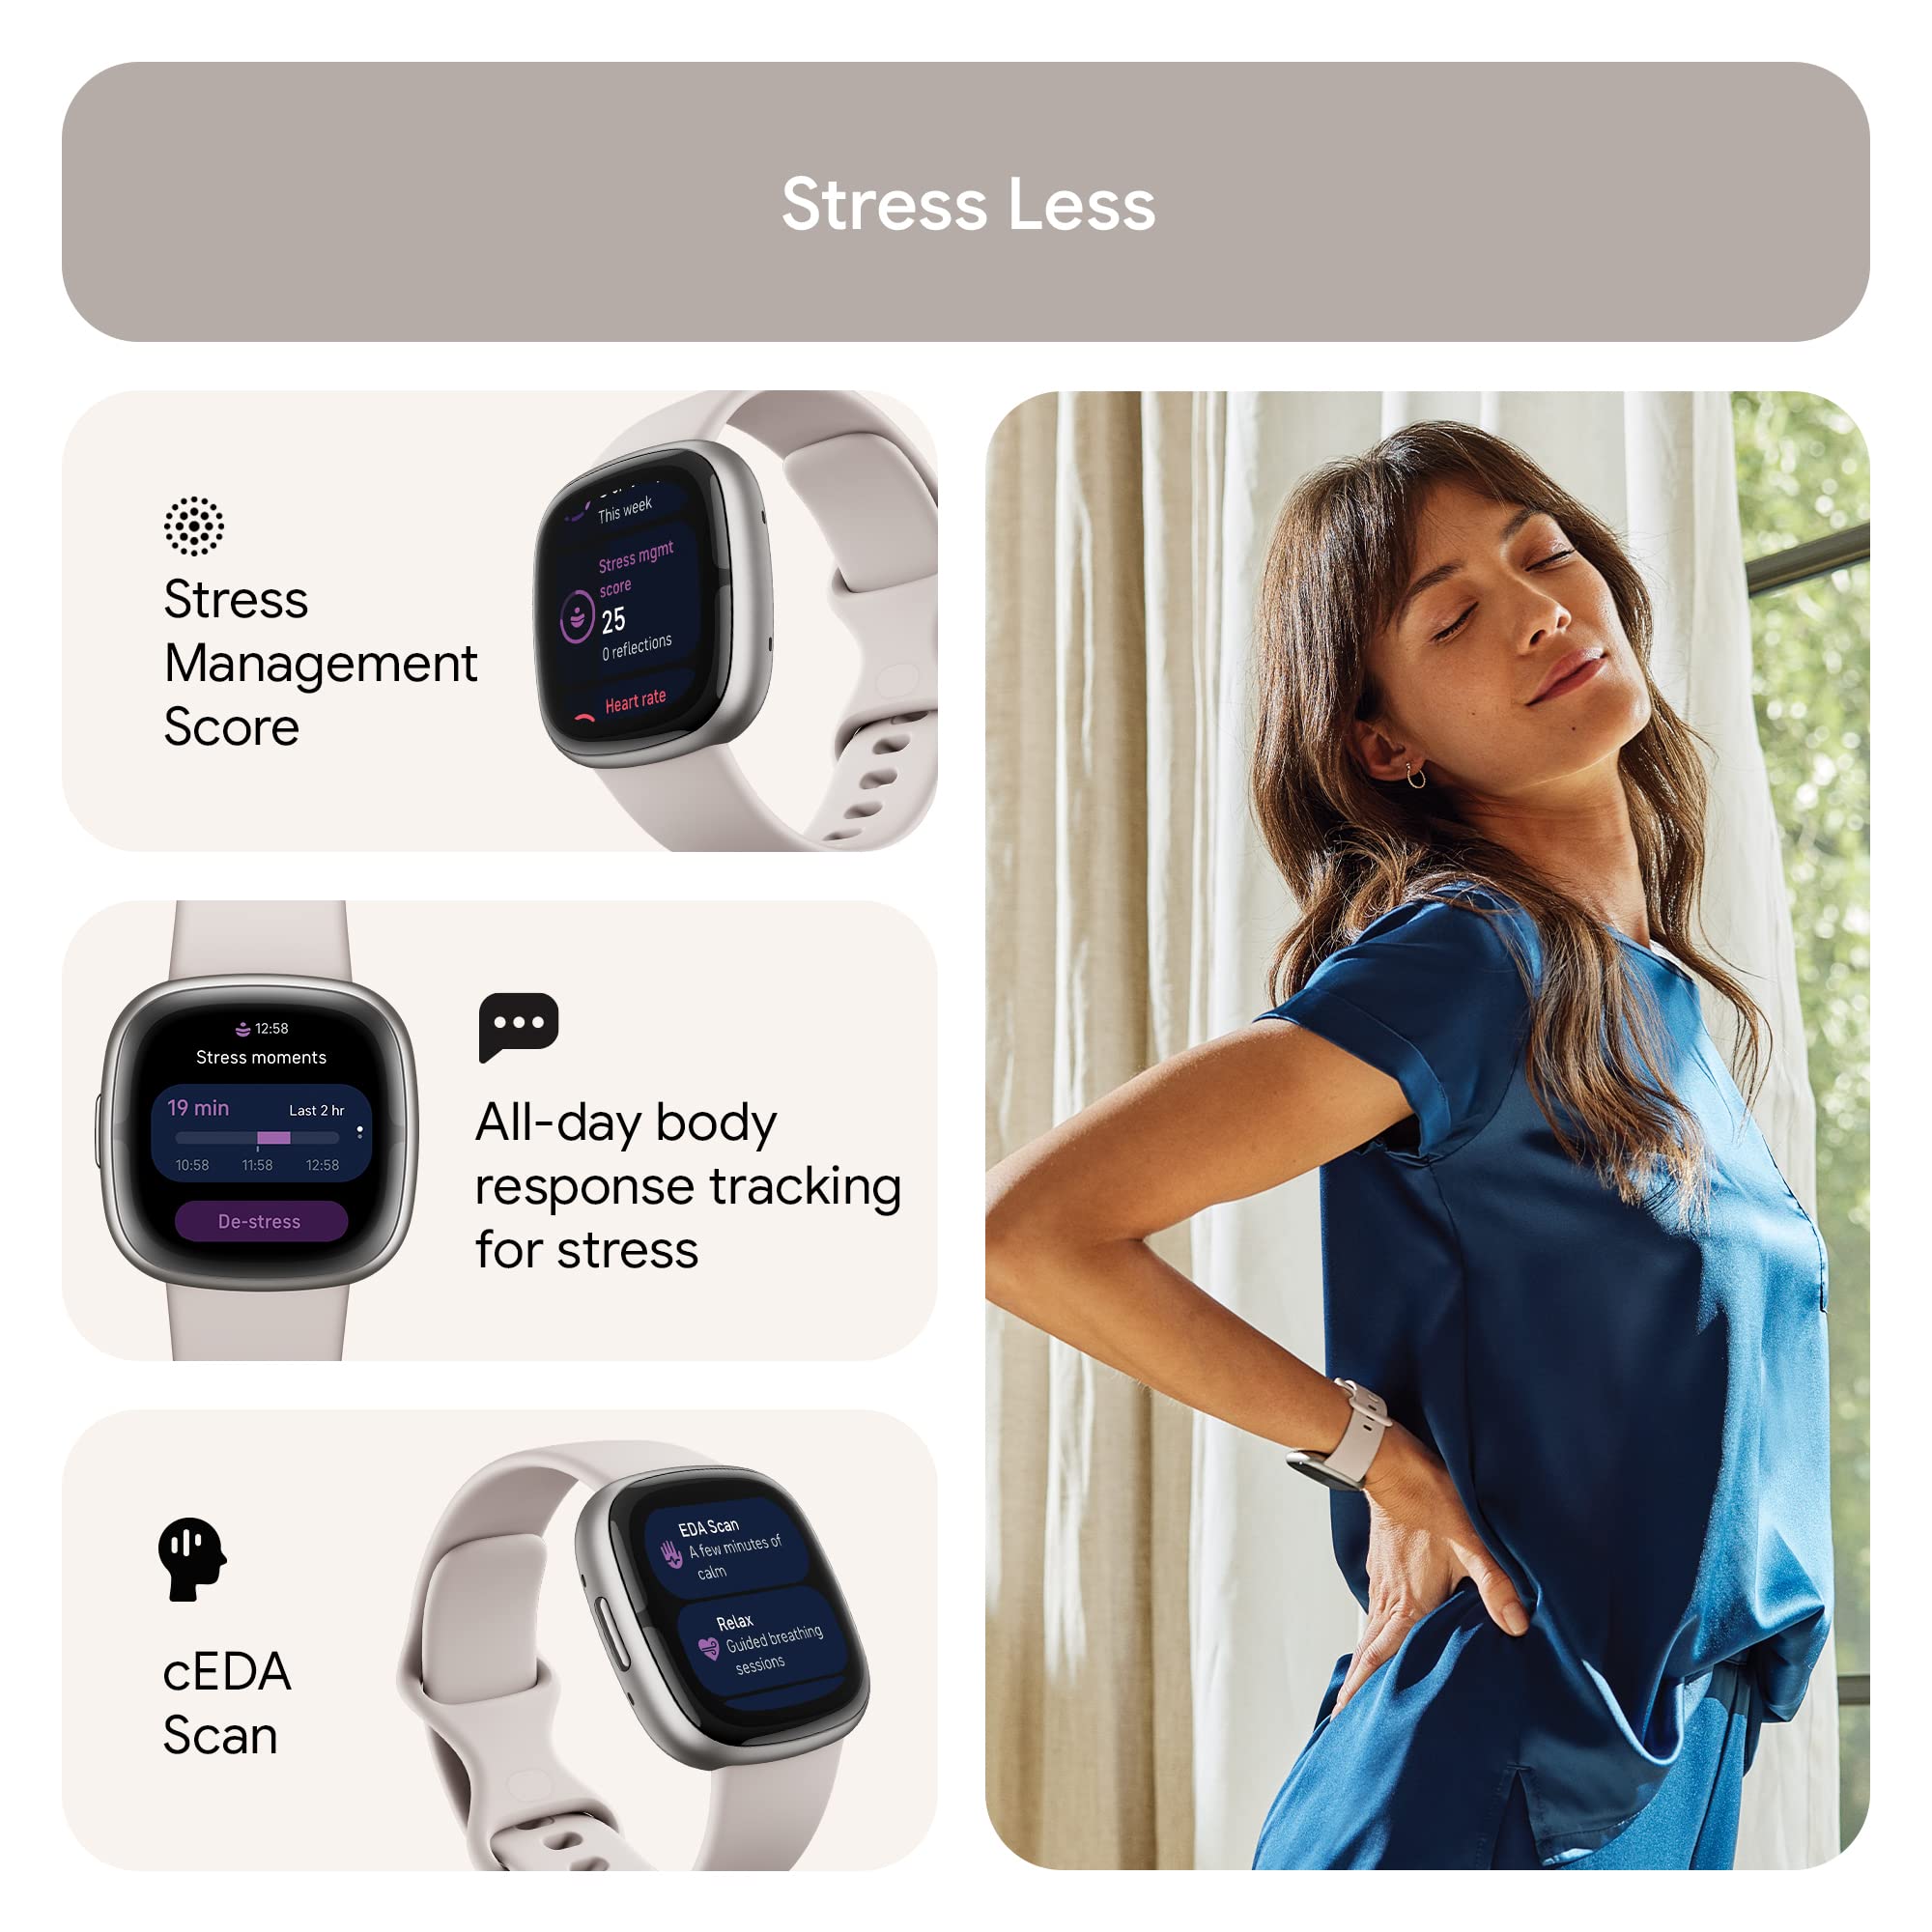 Fitbit Sense 2 Advanced Health and Fitness Smartwatch with Tools to Manage Stress and Sleep, ECG App, SpO2, 24/7 Heart Rate and GPS, Lunar White/Platinum, One Size (S & L Bands Included)